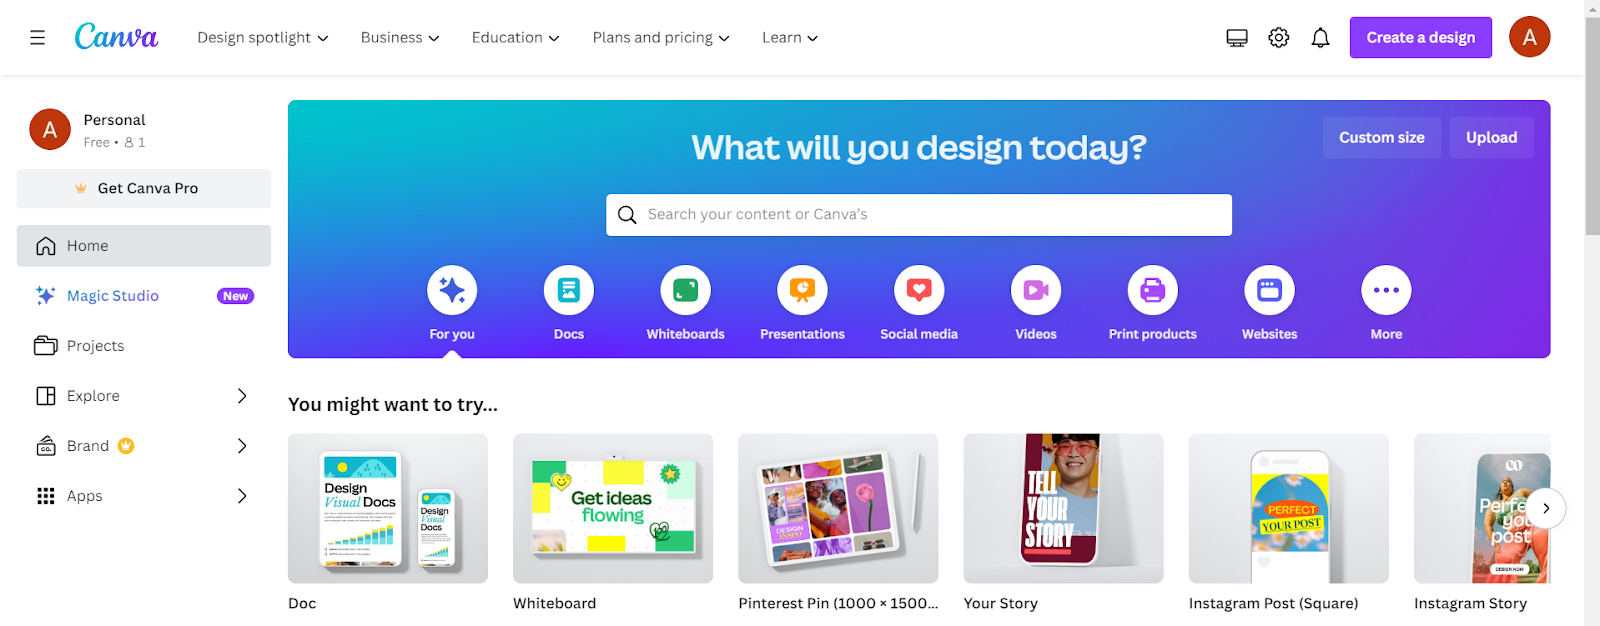 User Interface of Canva Software